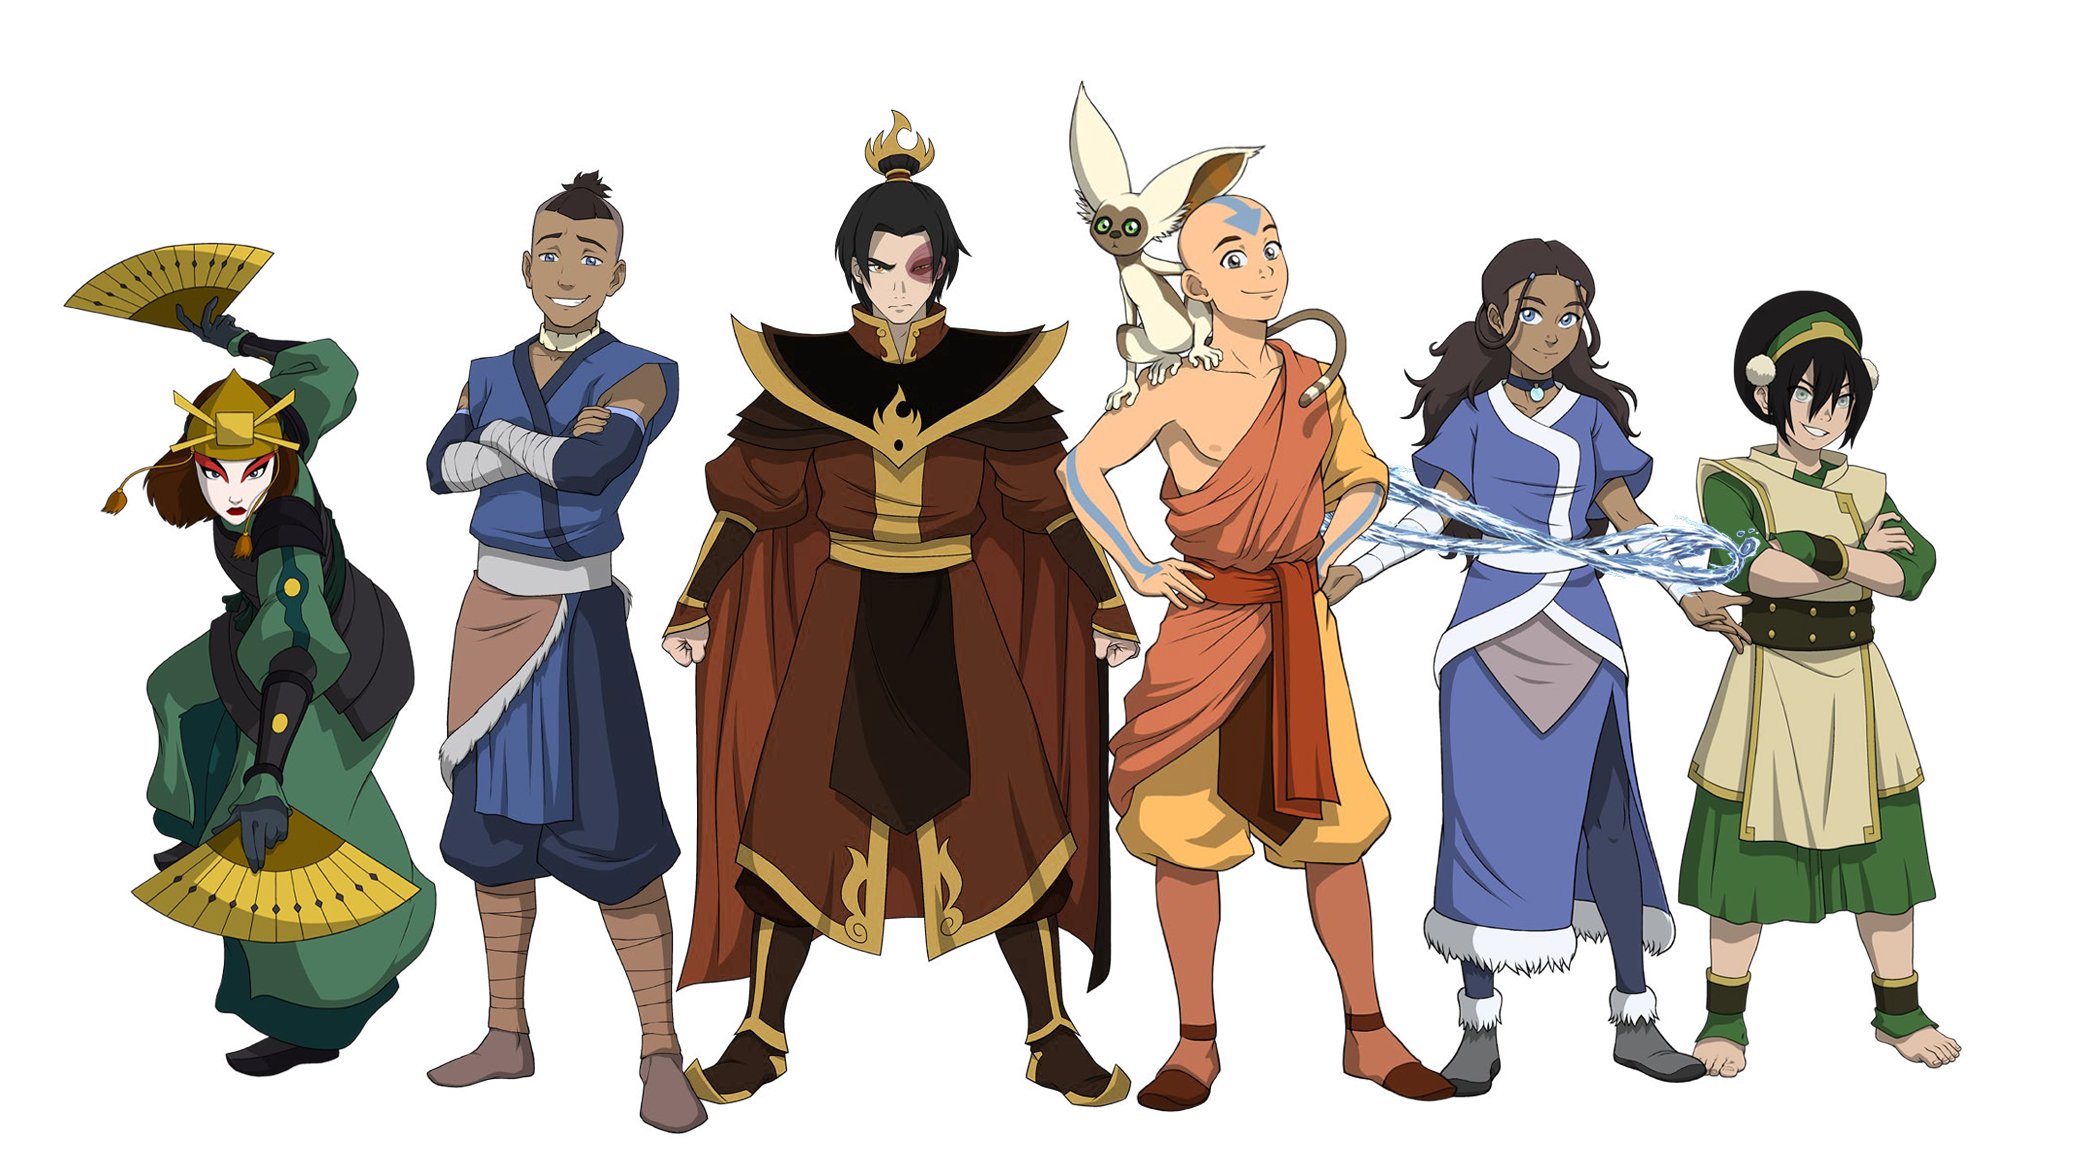 New “Avatar: The Last Airbender” Movie Confirmed For 2025 Release